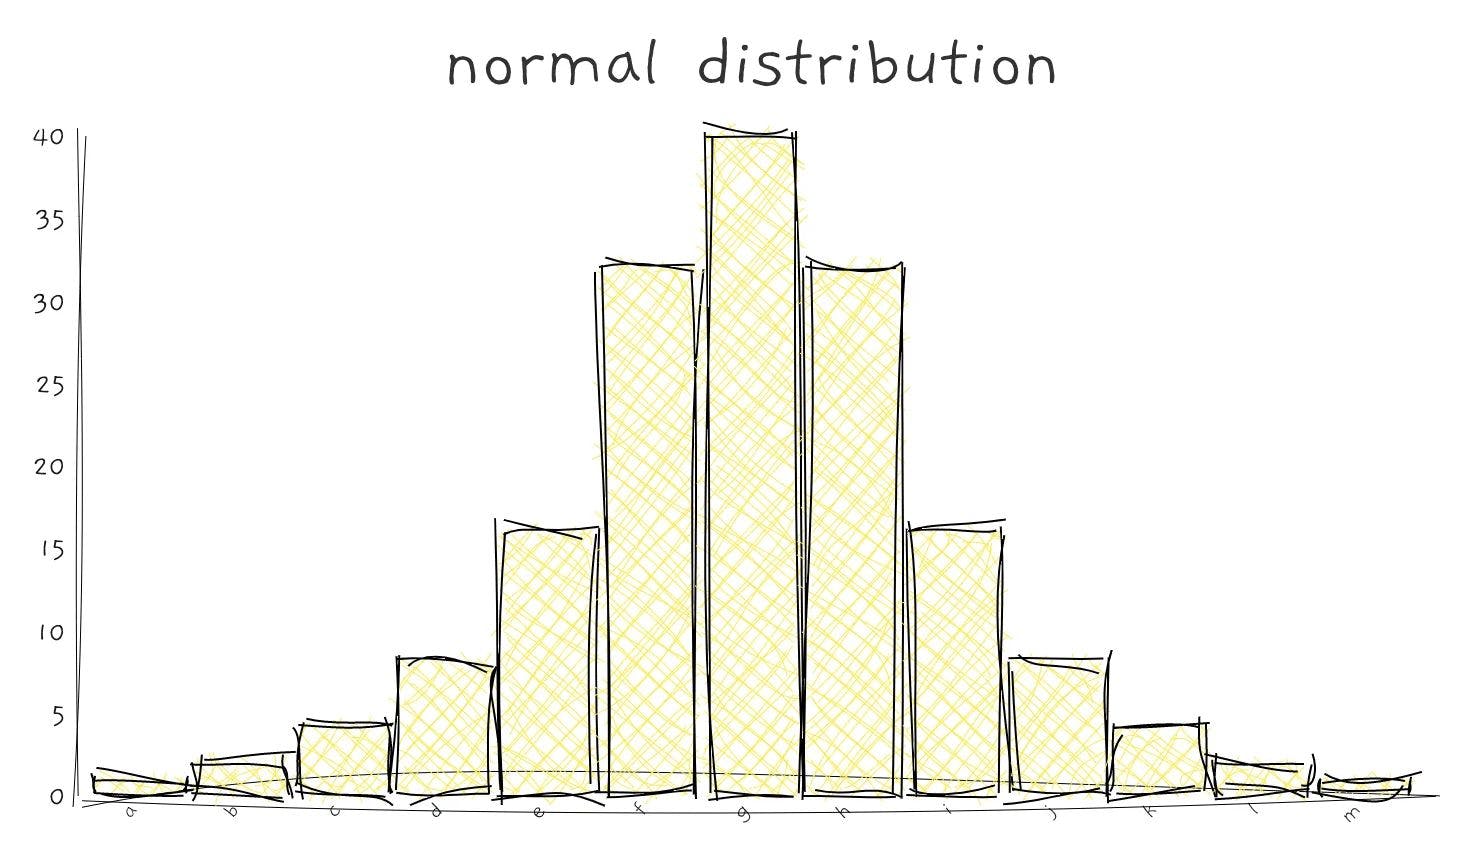 Bar charts are useful for visualising distributions